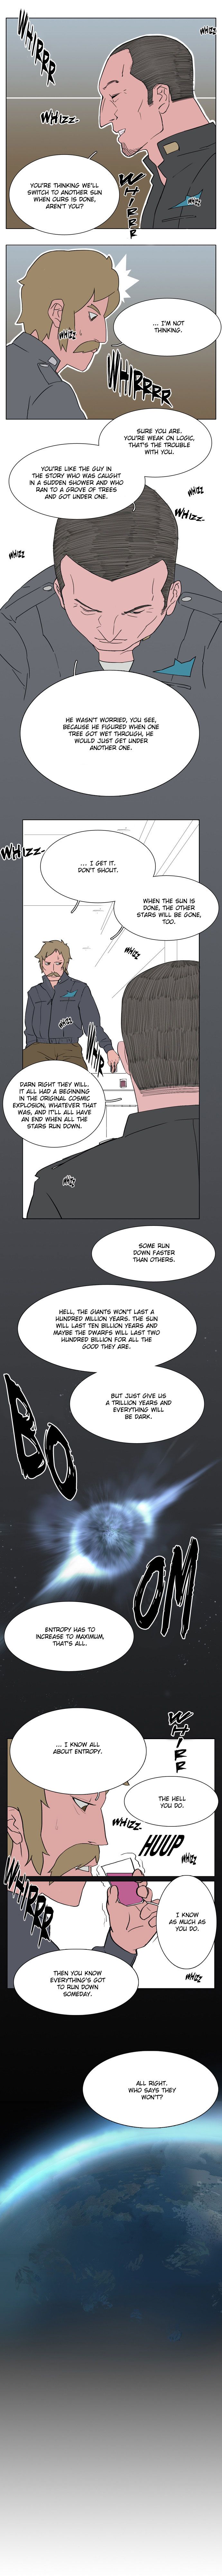 The Last Question Panel 03